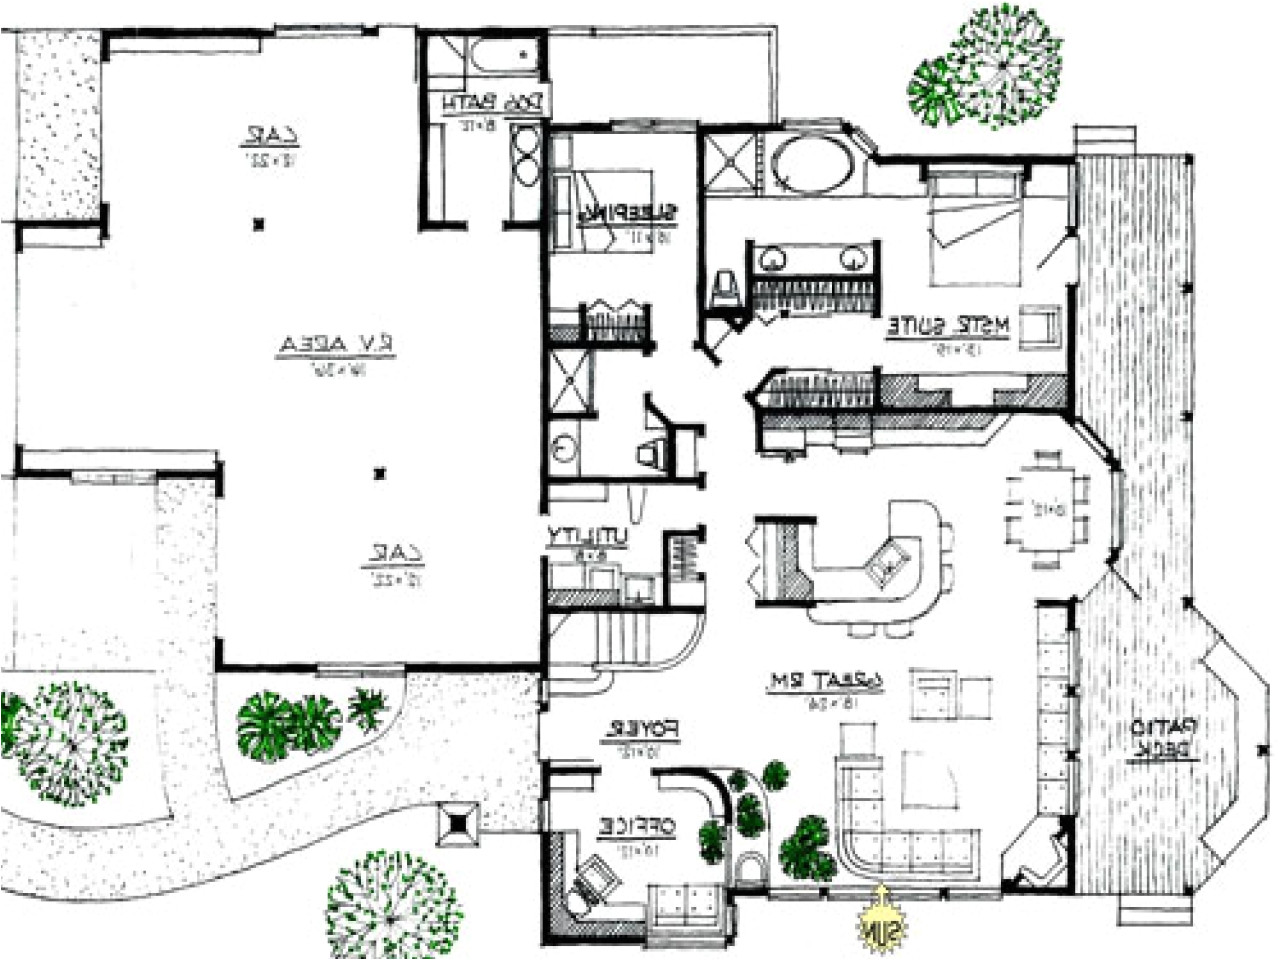 e5f425f78a1398b2 rustic home floor plan rustic country house plans